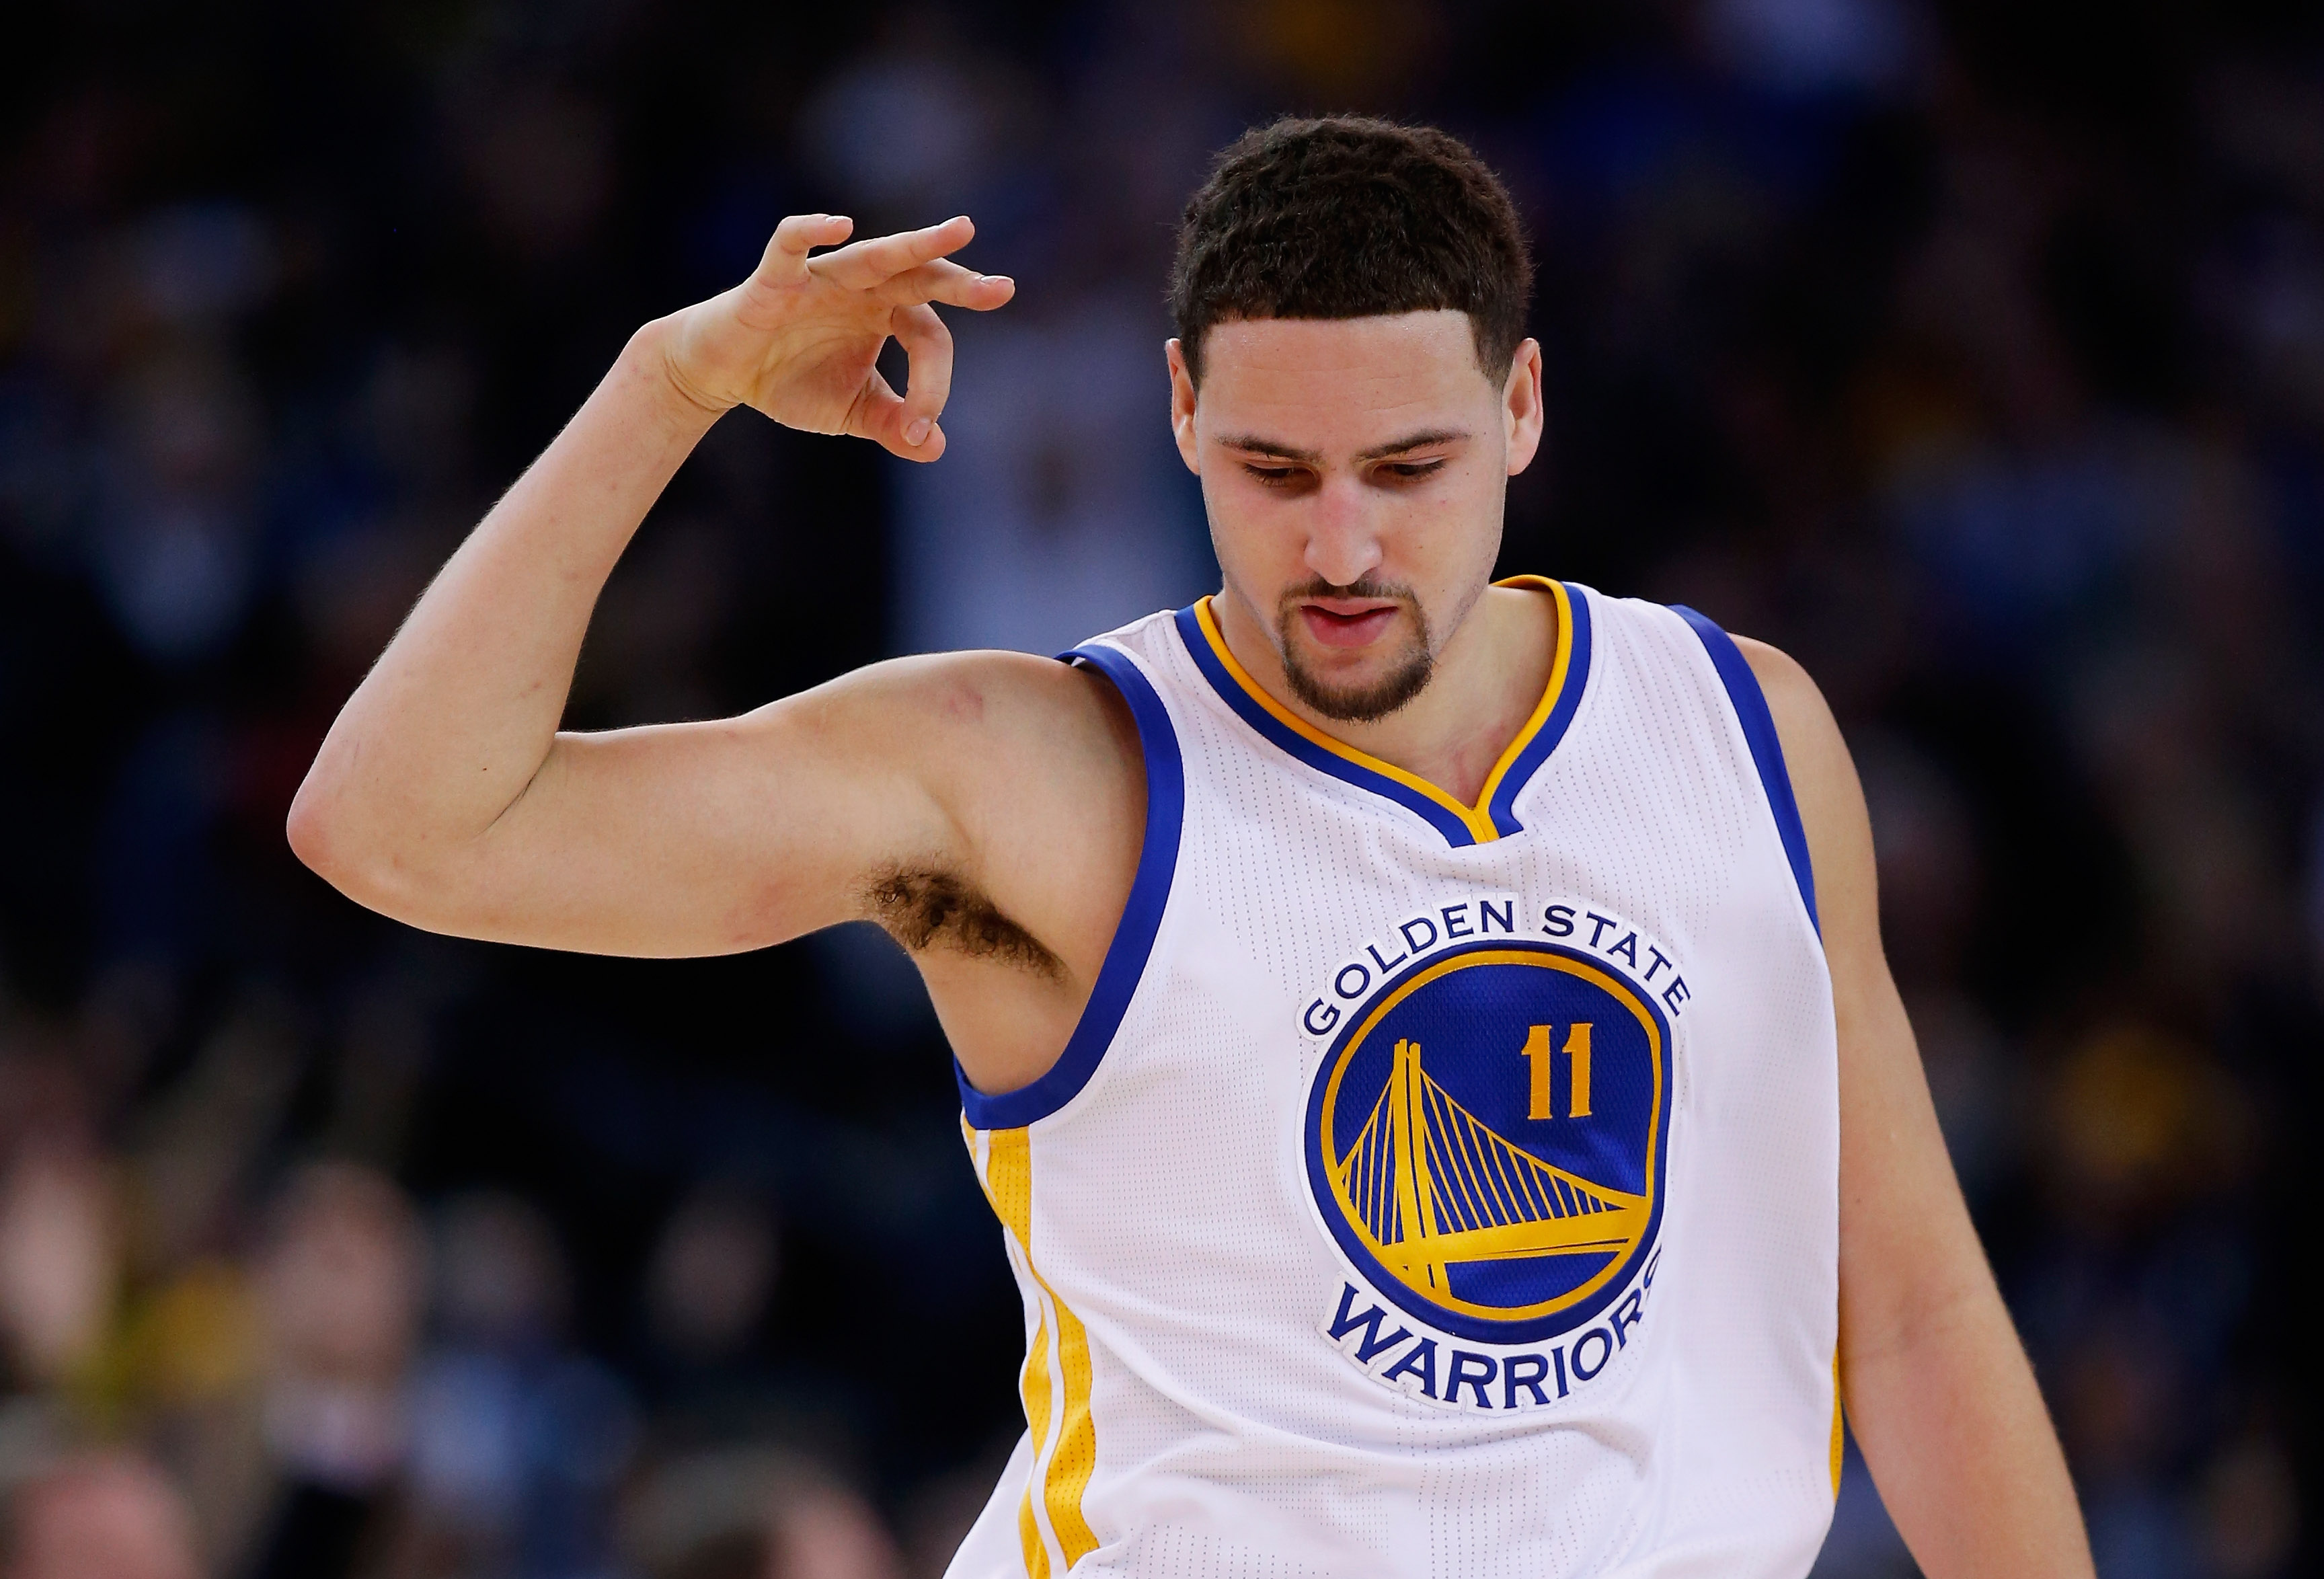 OAKLAND, CA - DECEMBER 16: Klay Thompson #11 of the Golden State Warriors reacts after making a three-point basket against the Phoenix Suns at ORACLE Arena on December 16, 2015 in Oakland, California. NOTE TO USER: User expressly acknowledges and agrees that, by downloading and or using this photograph, User is consenting to the terms and conditions of the Getty Images License Agreement. (Photo by Ezra Shaw/Getty Images)